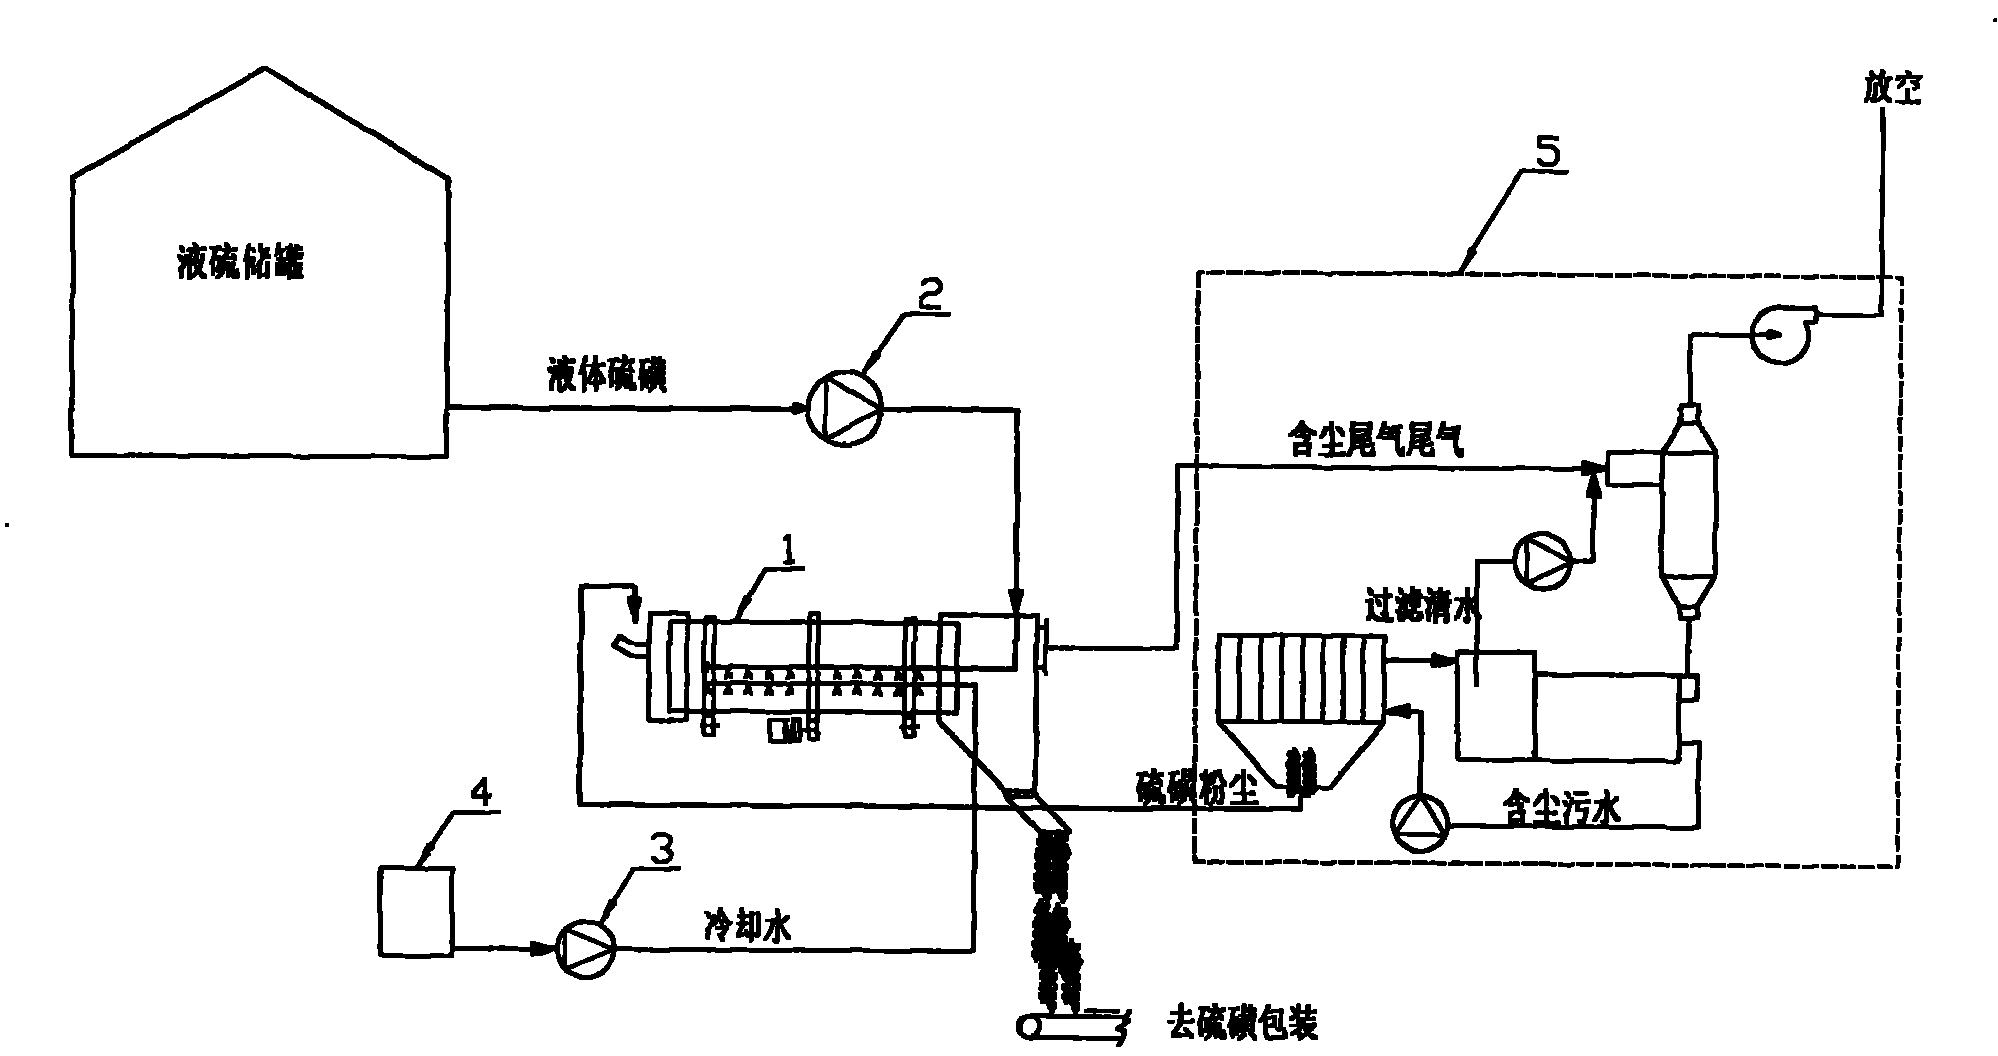 Manufacturing equipment and manufacturing process for spherical sulfur granules